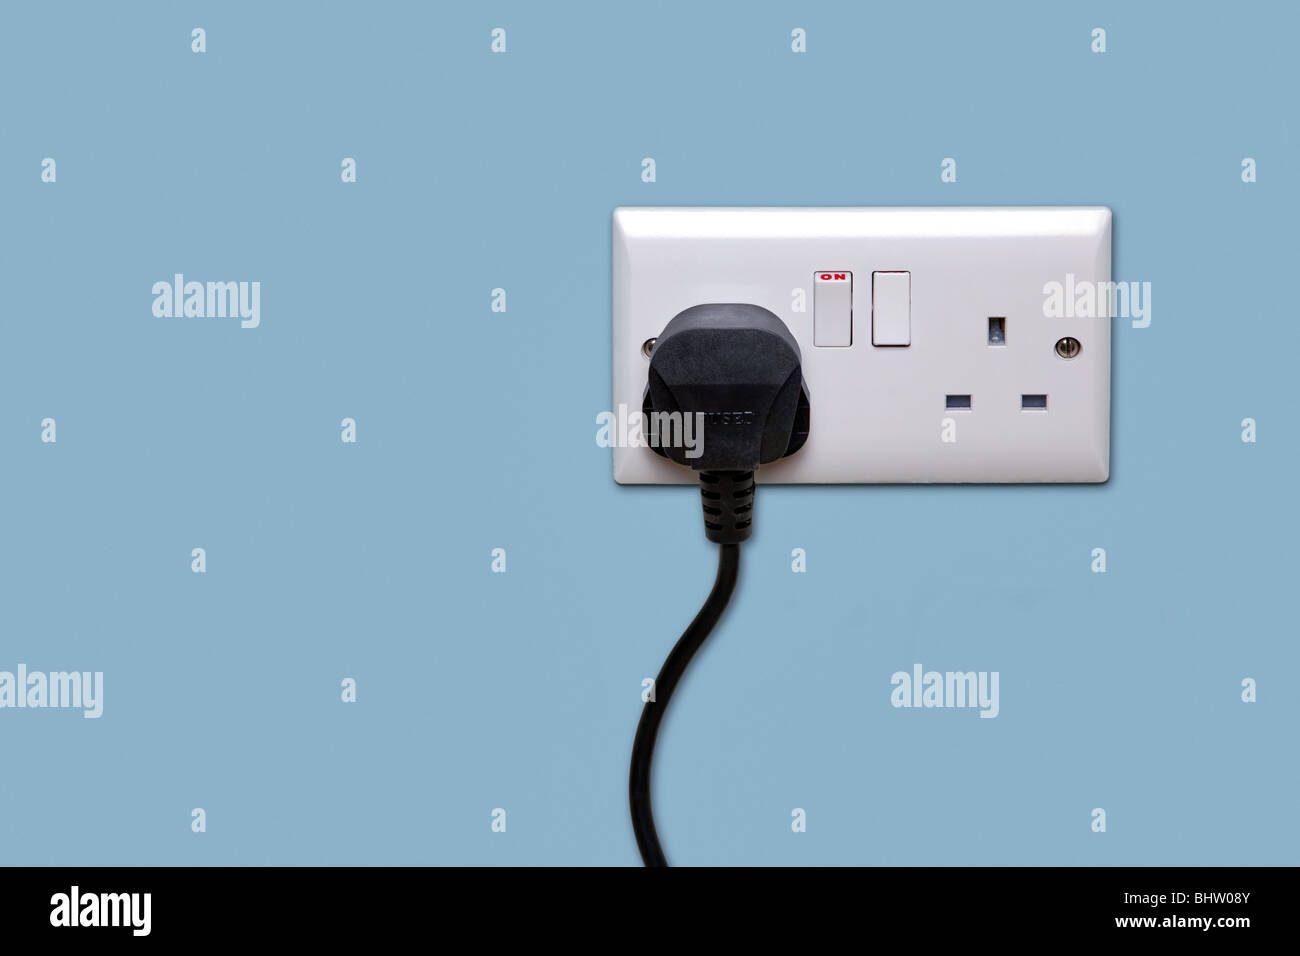 Double electrical power socket and single plug switched on, blue background. Stock Photo